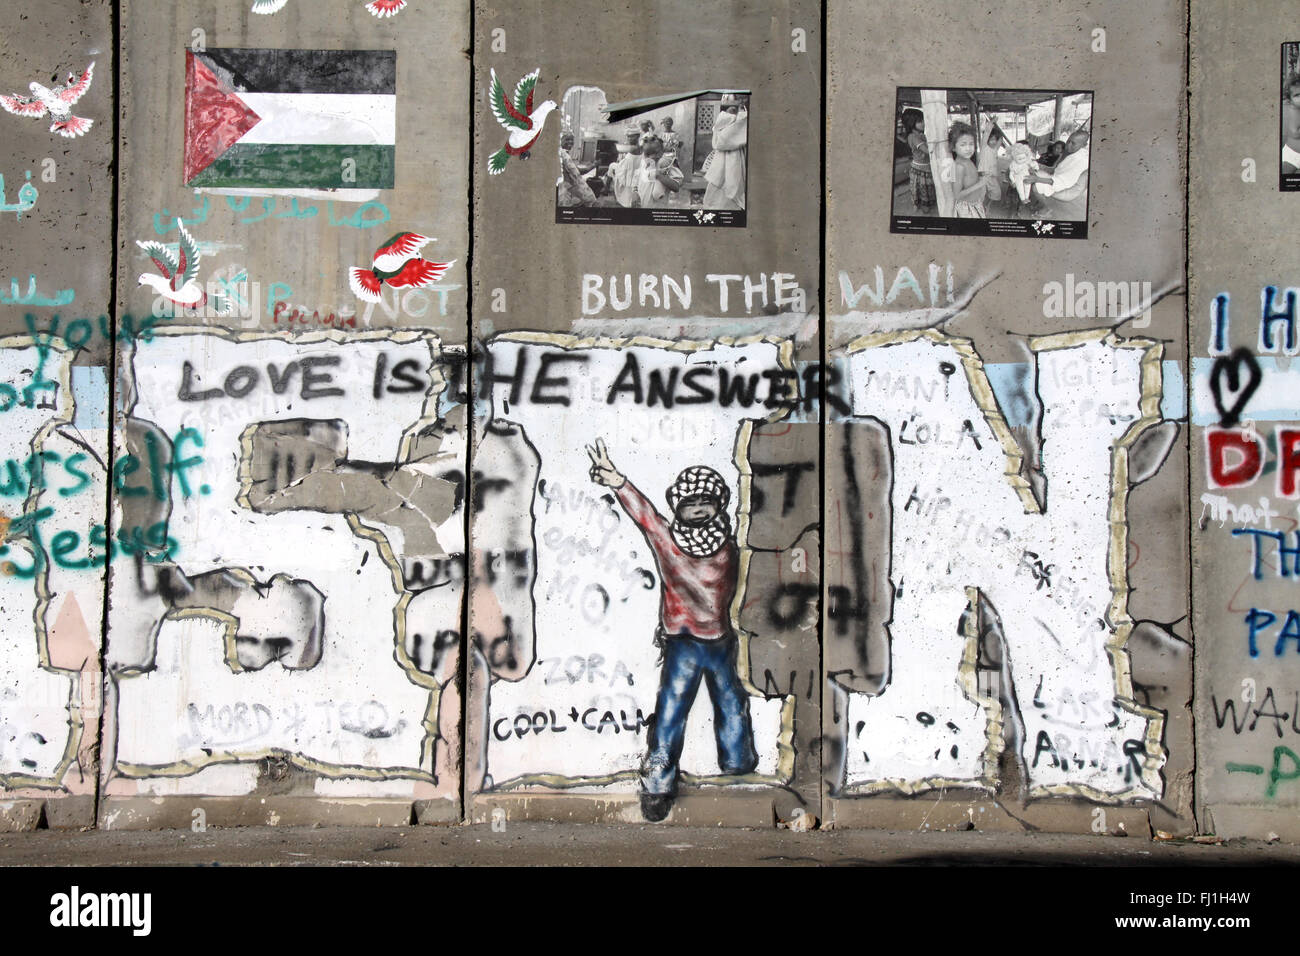 Palestine - Bethlehem checkpoint and occupation wall - palestinian occupied territories Stock Photo